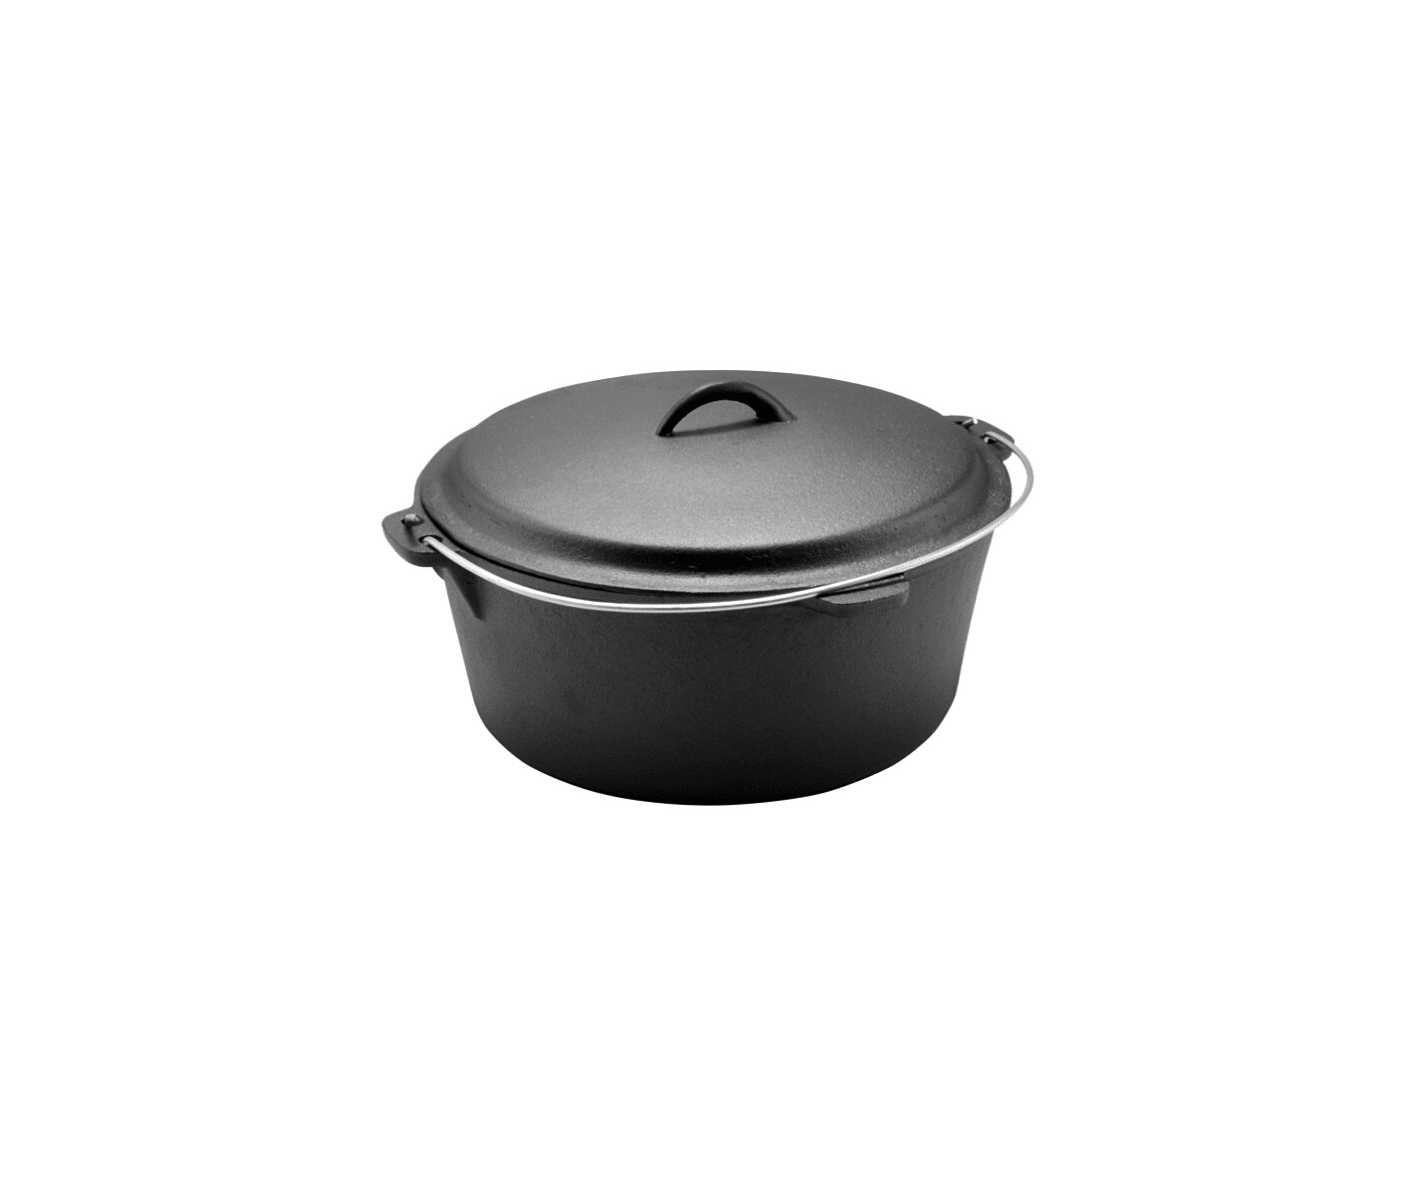 Beautiful cast-iron pan for on the BBQ or over the fire of the tripod set